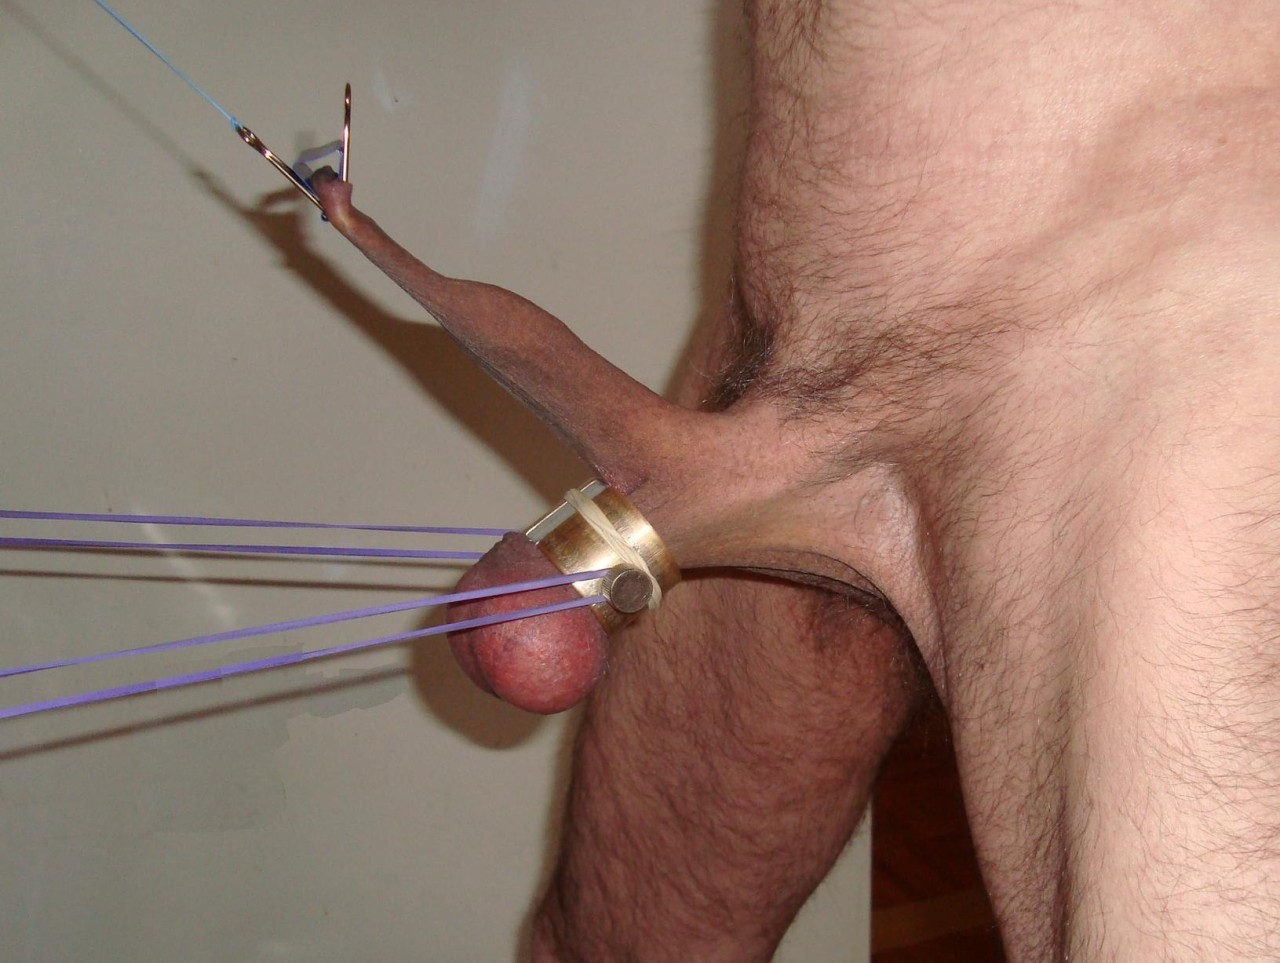 Cbt With Pliers